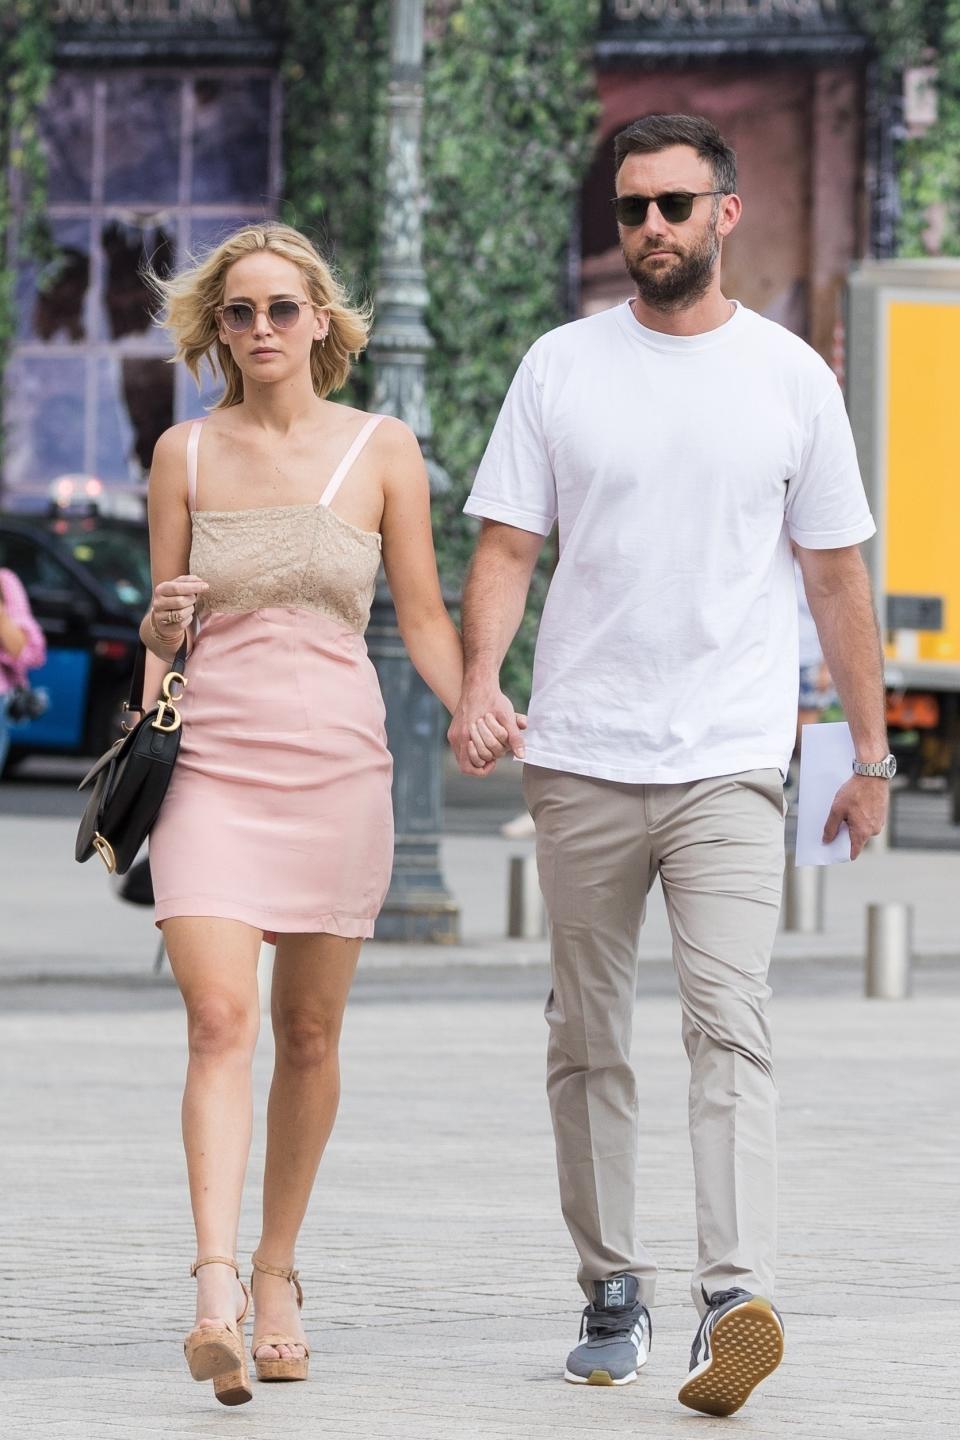 the two hold hands as they walk down the street